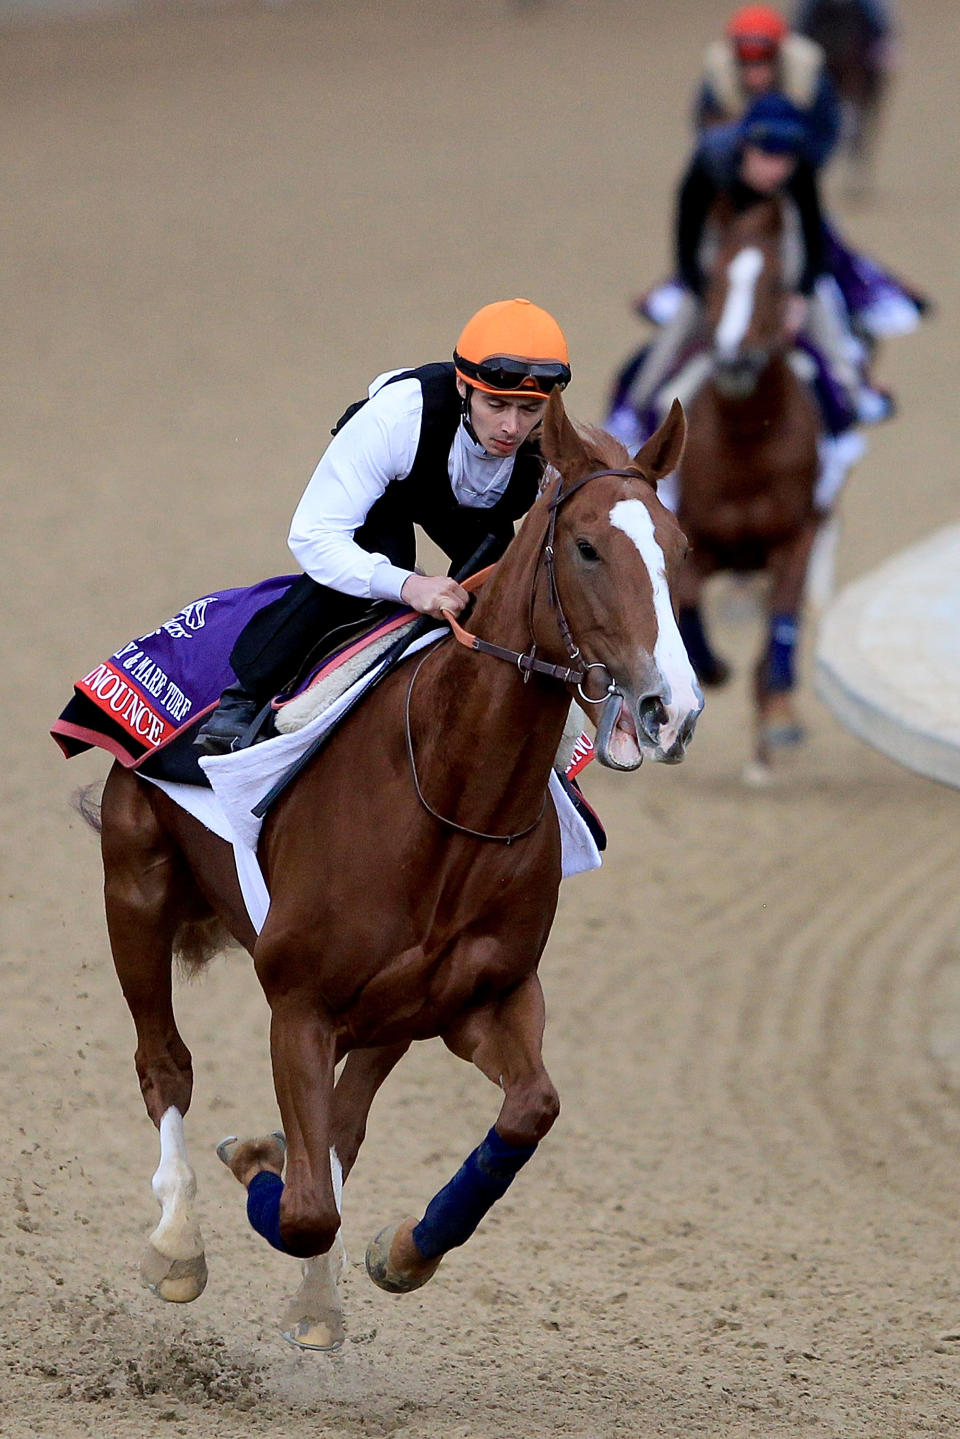 2011 Breeders' Cup World Championships